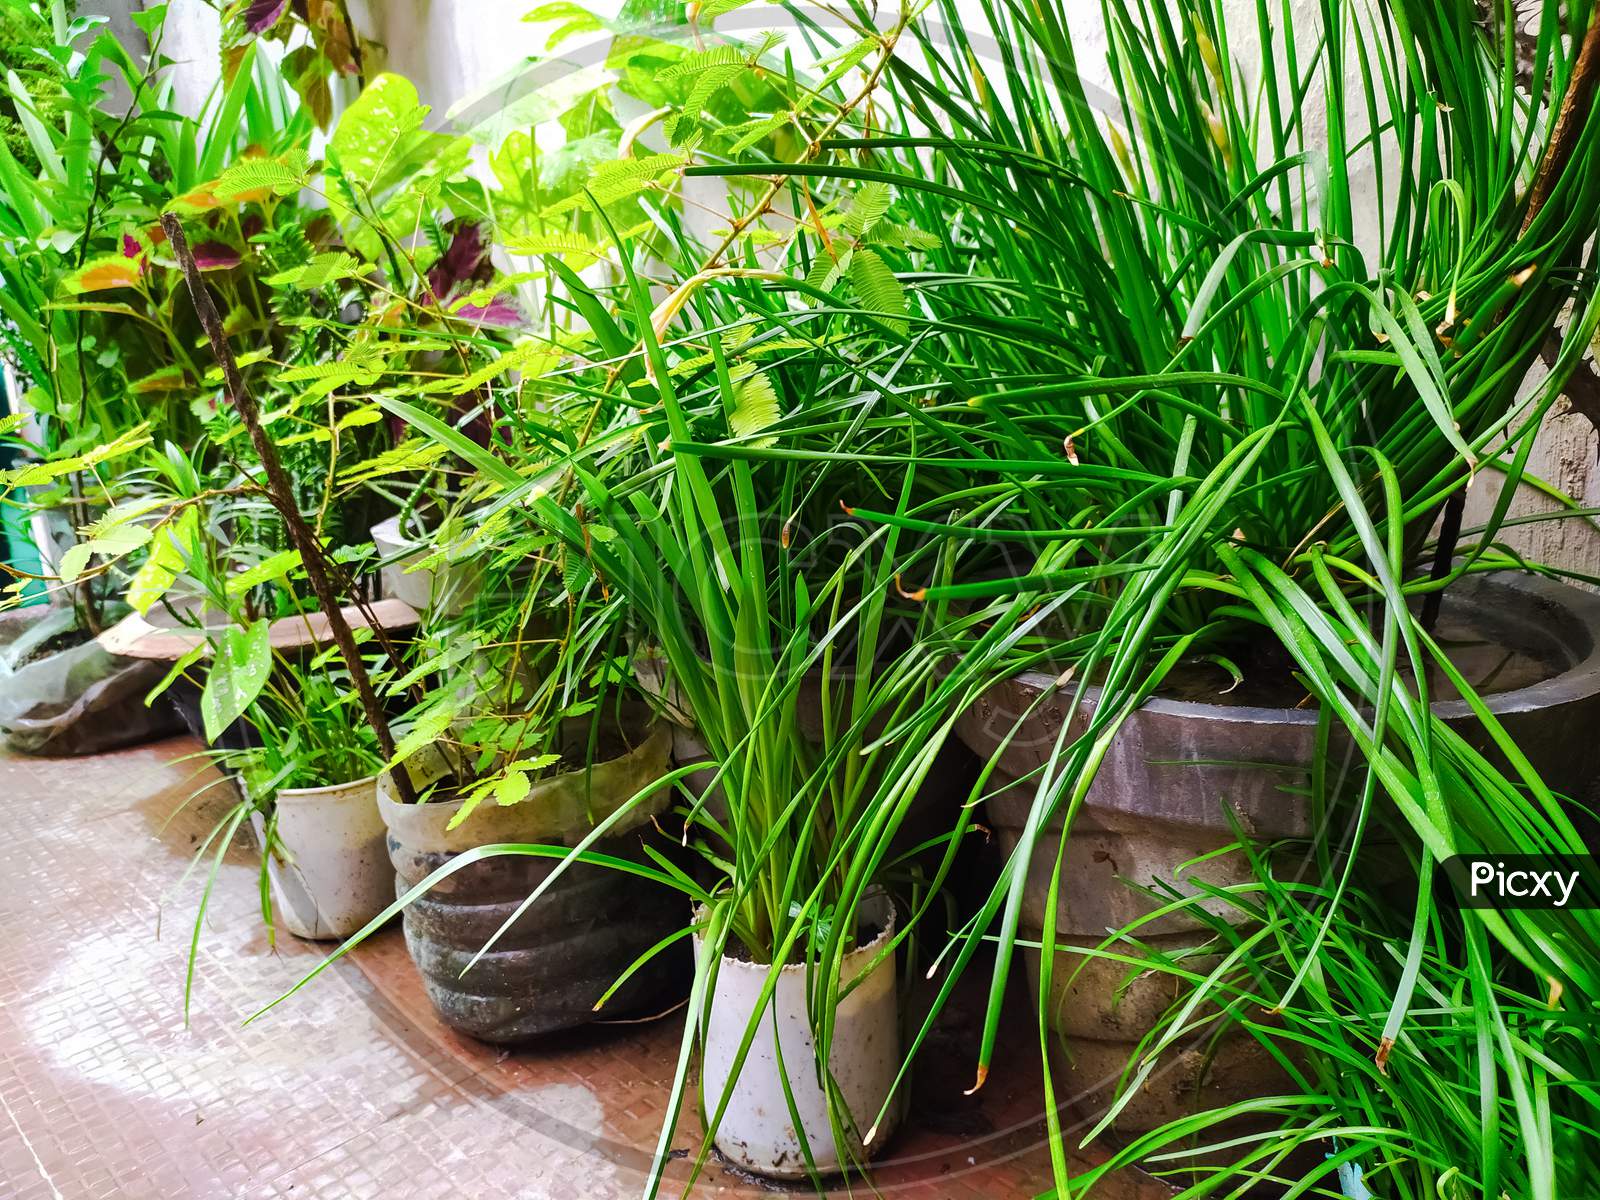 various types of plants have been planted in pots at home at rainy season. Home gardening